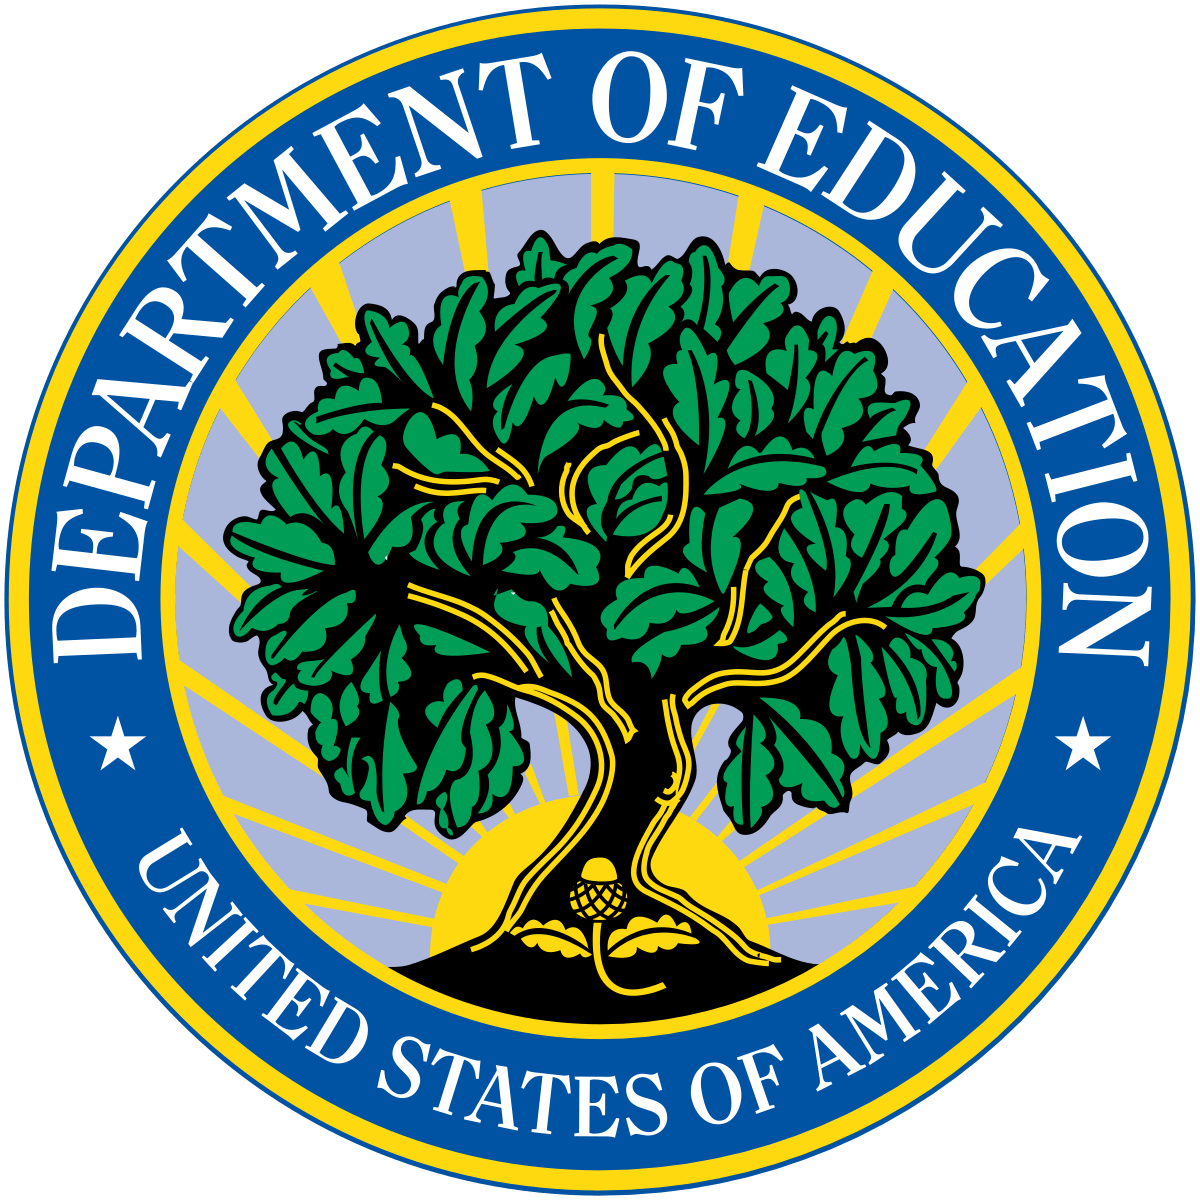 Title One Education Logo - United States Department of Education